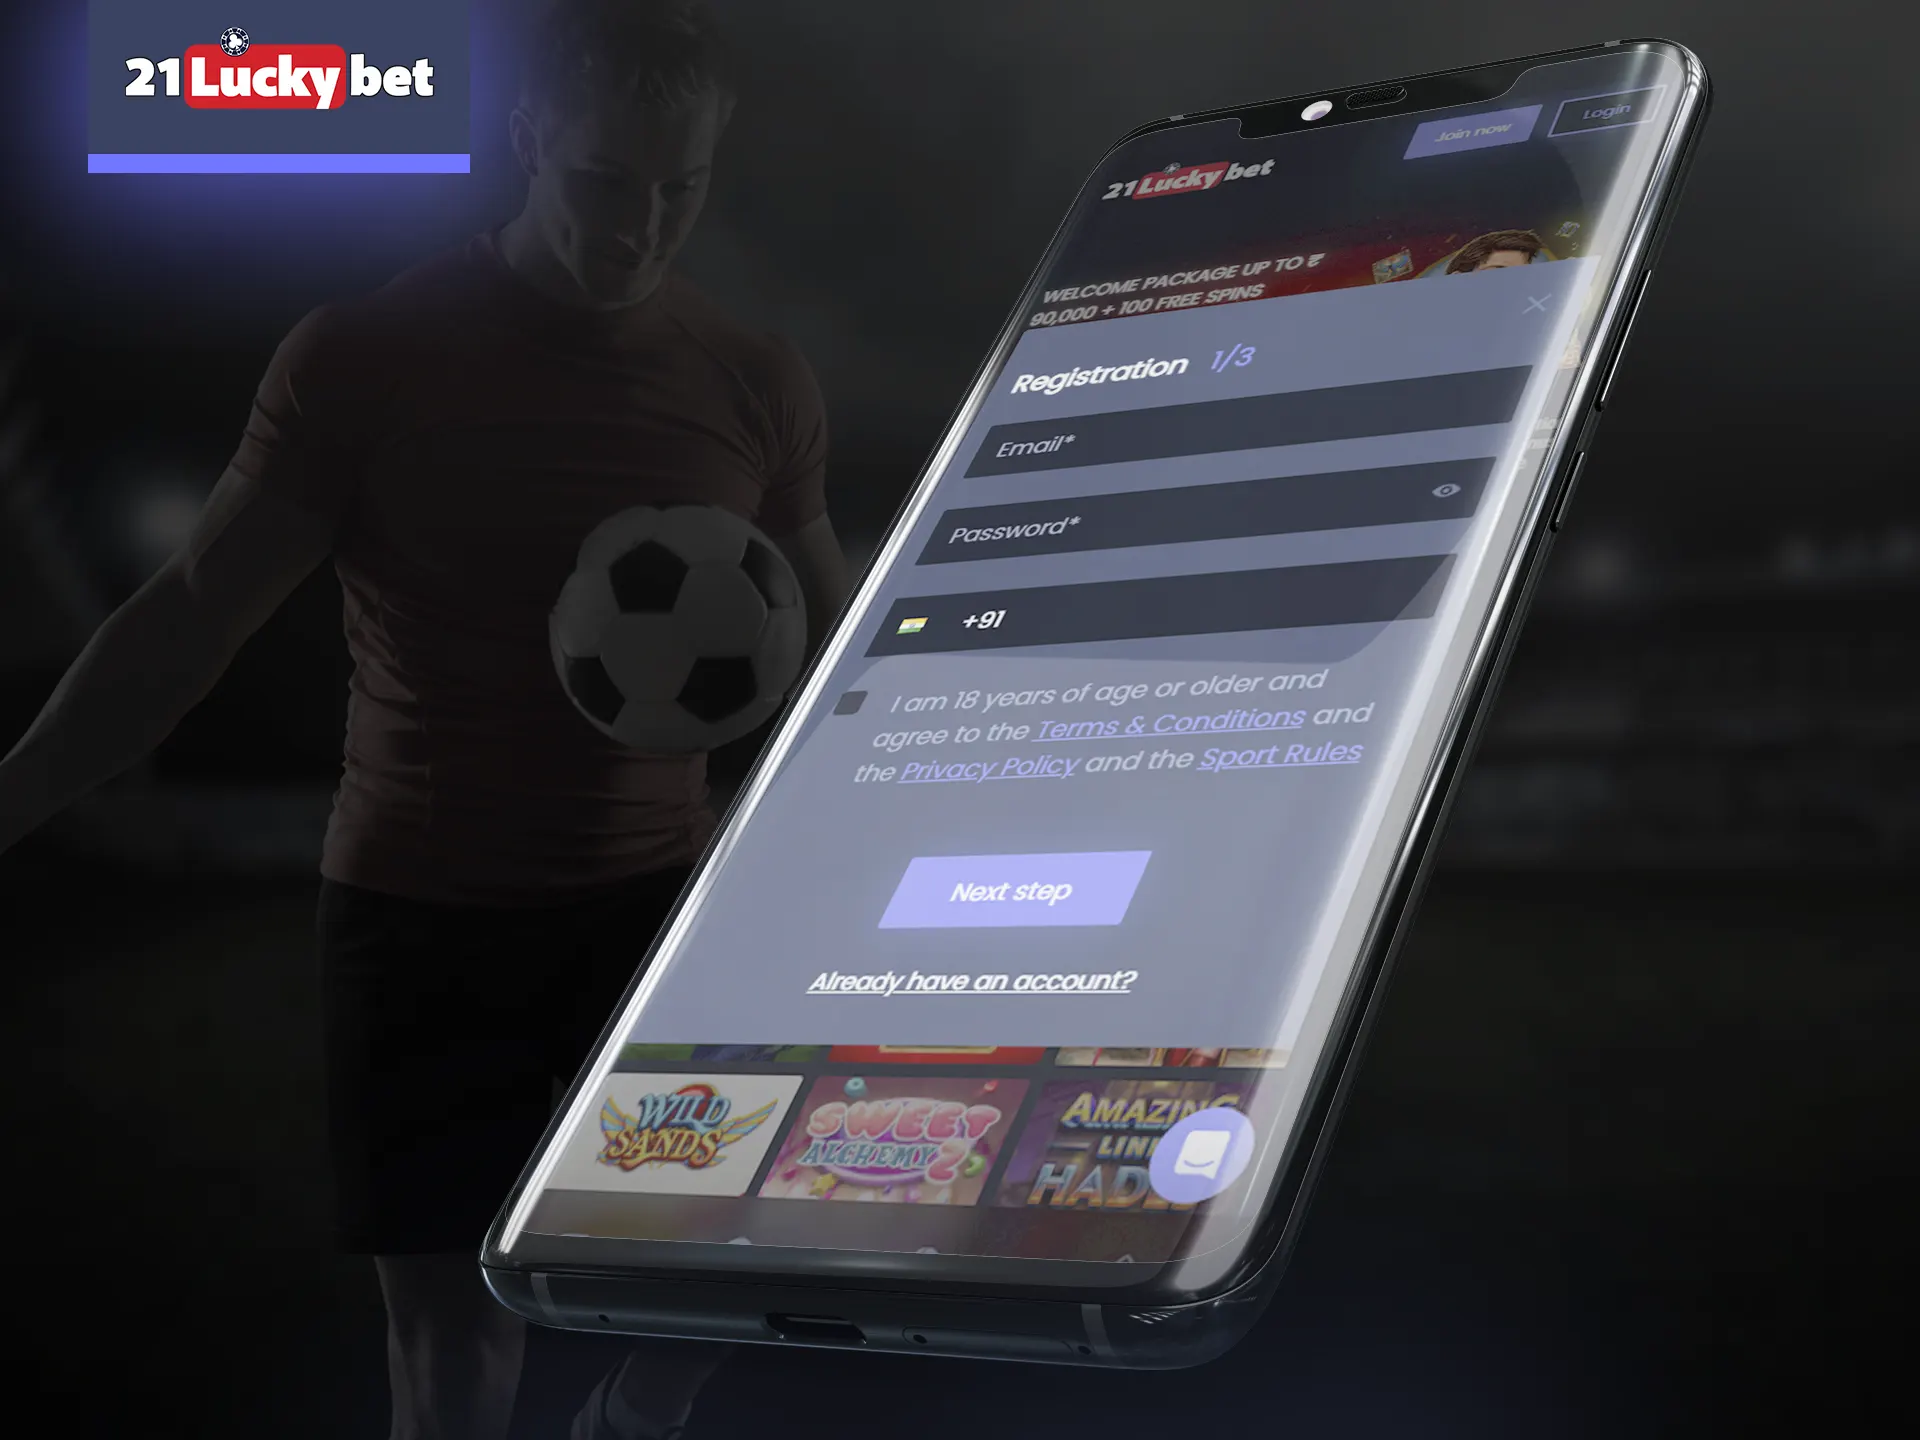 In the 21luckybet app go through a simple registration process.